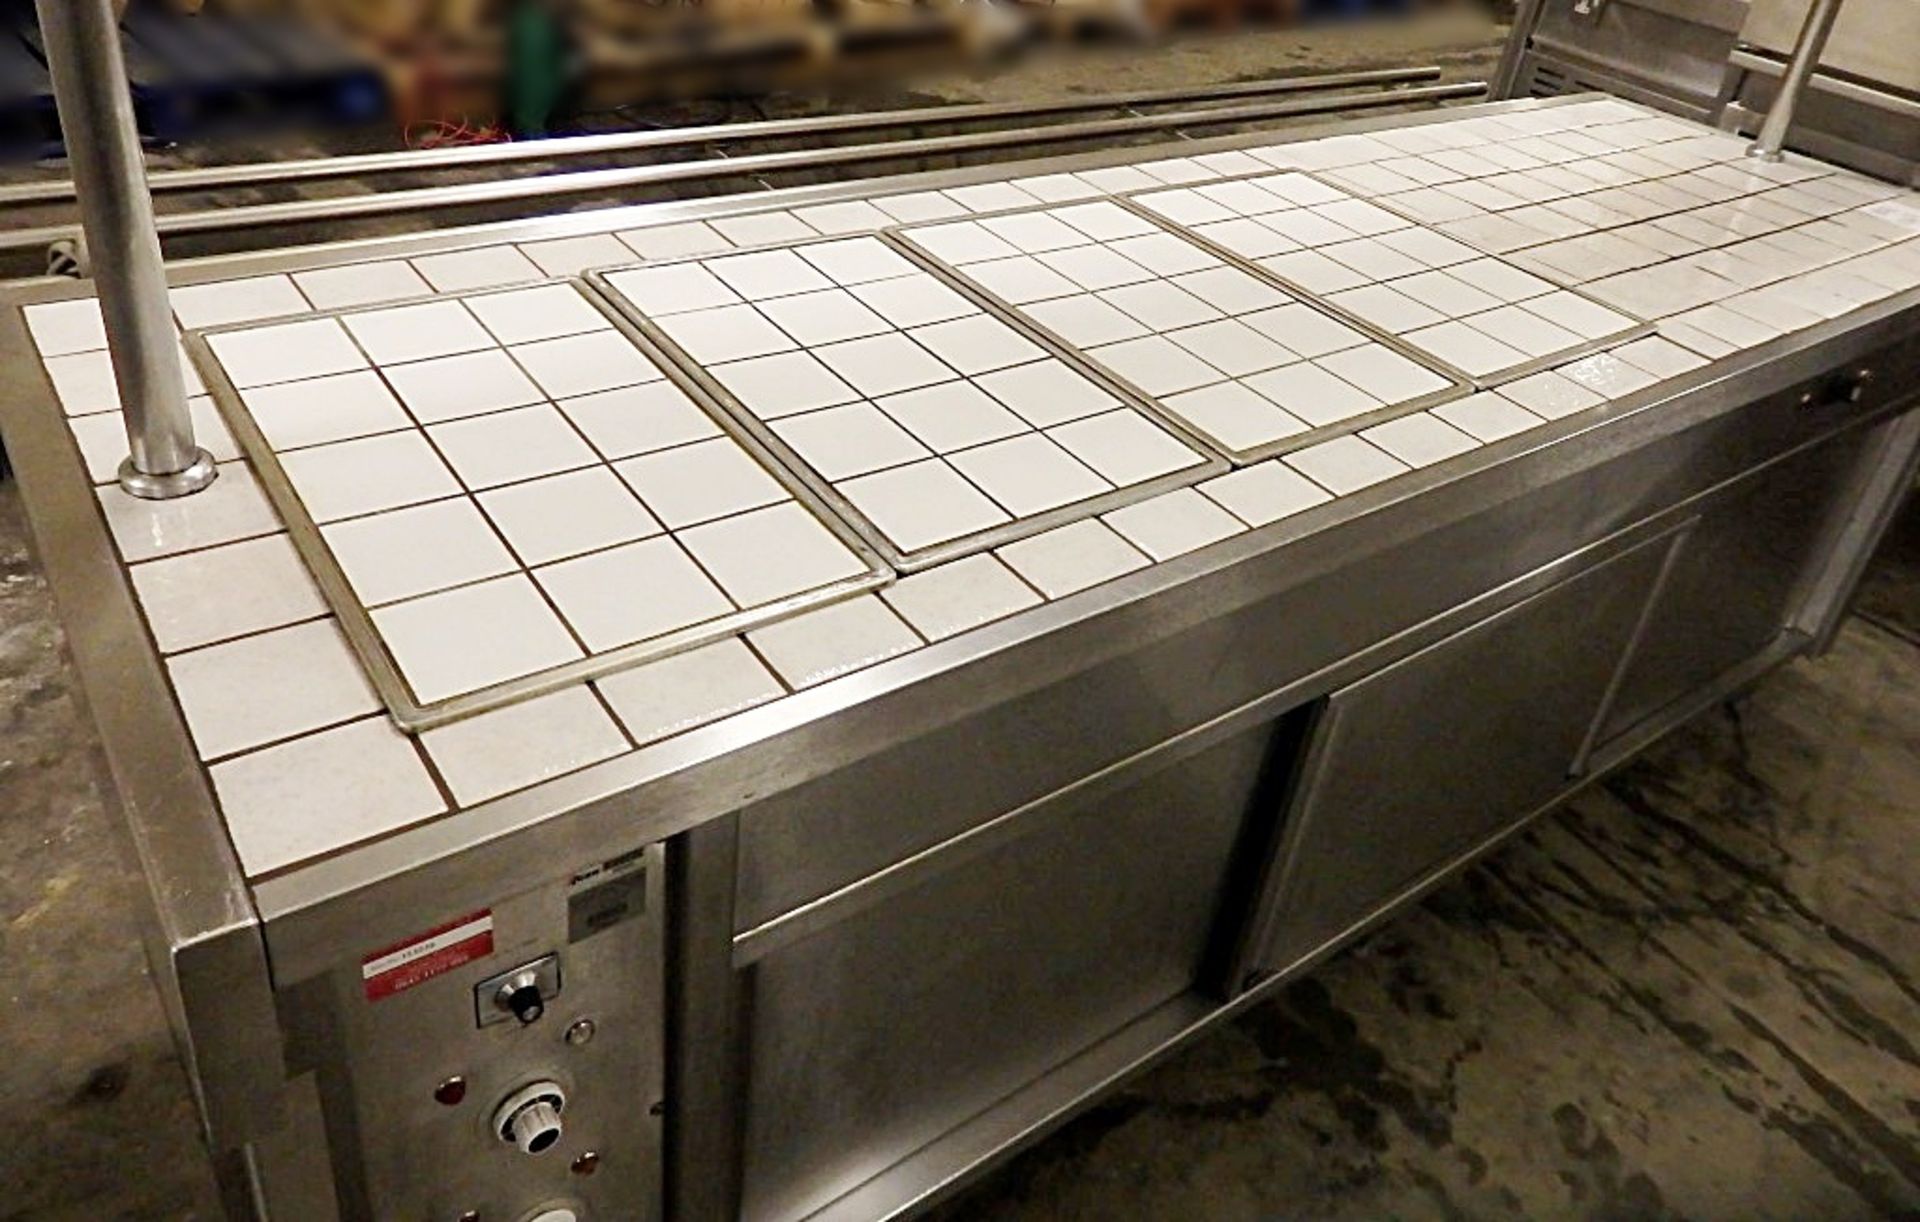 1 x Commercial Large Bain Marie Topped Hot Cupboard - Features Stainless Steel Construction With - Image 15 of 15